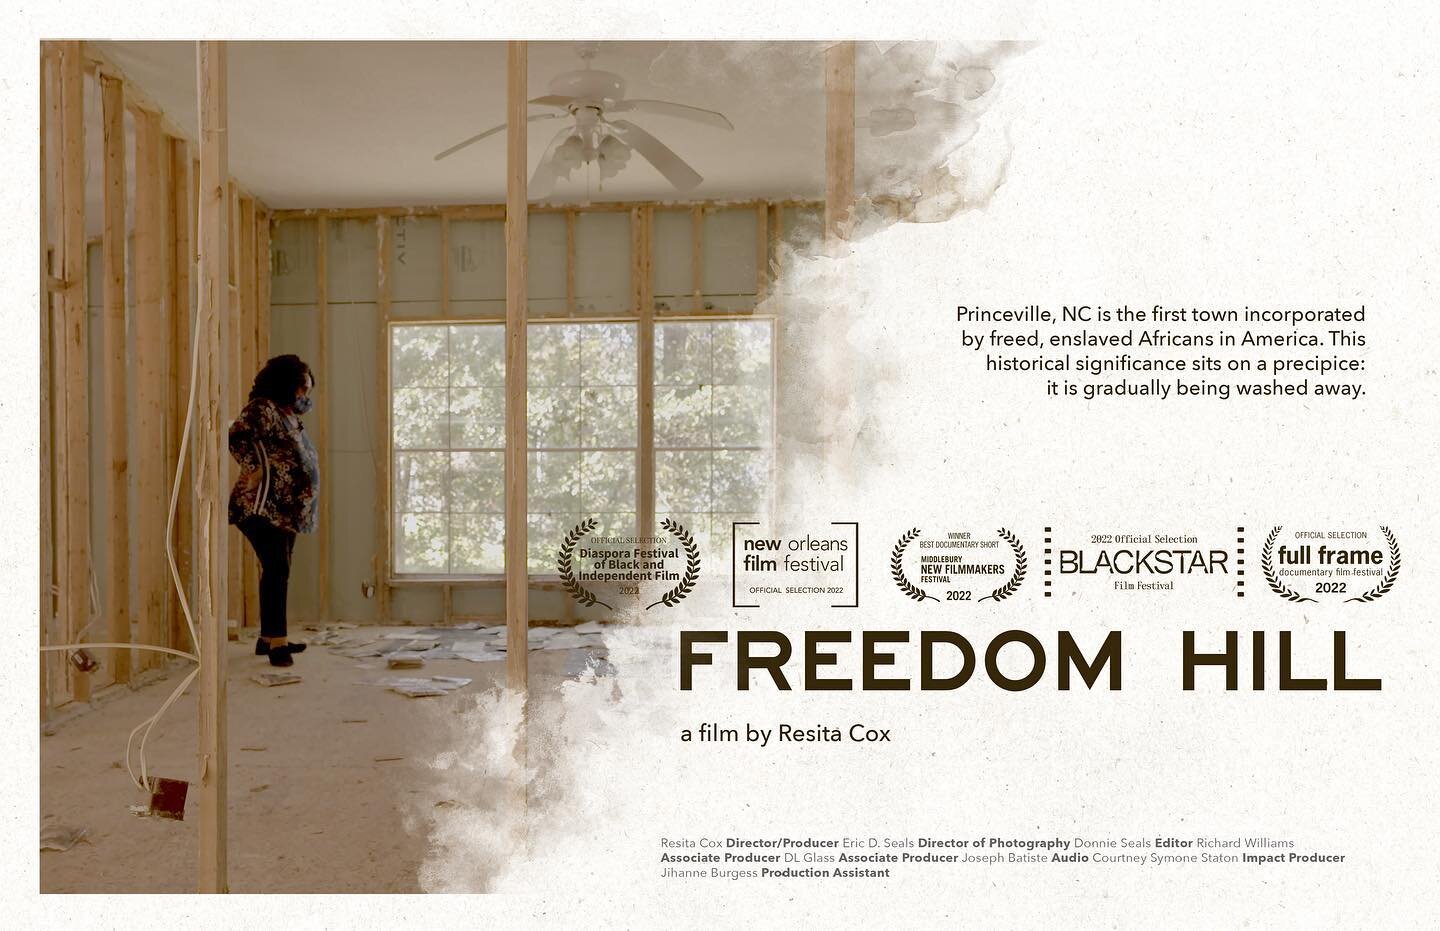 Mark your calendars - @FreedomHillDoc is screening at Diapsora Film Festival on September 29.

Get your tickets today. Click the link in our bio to learn more.  #FreedomHillDoc